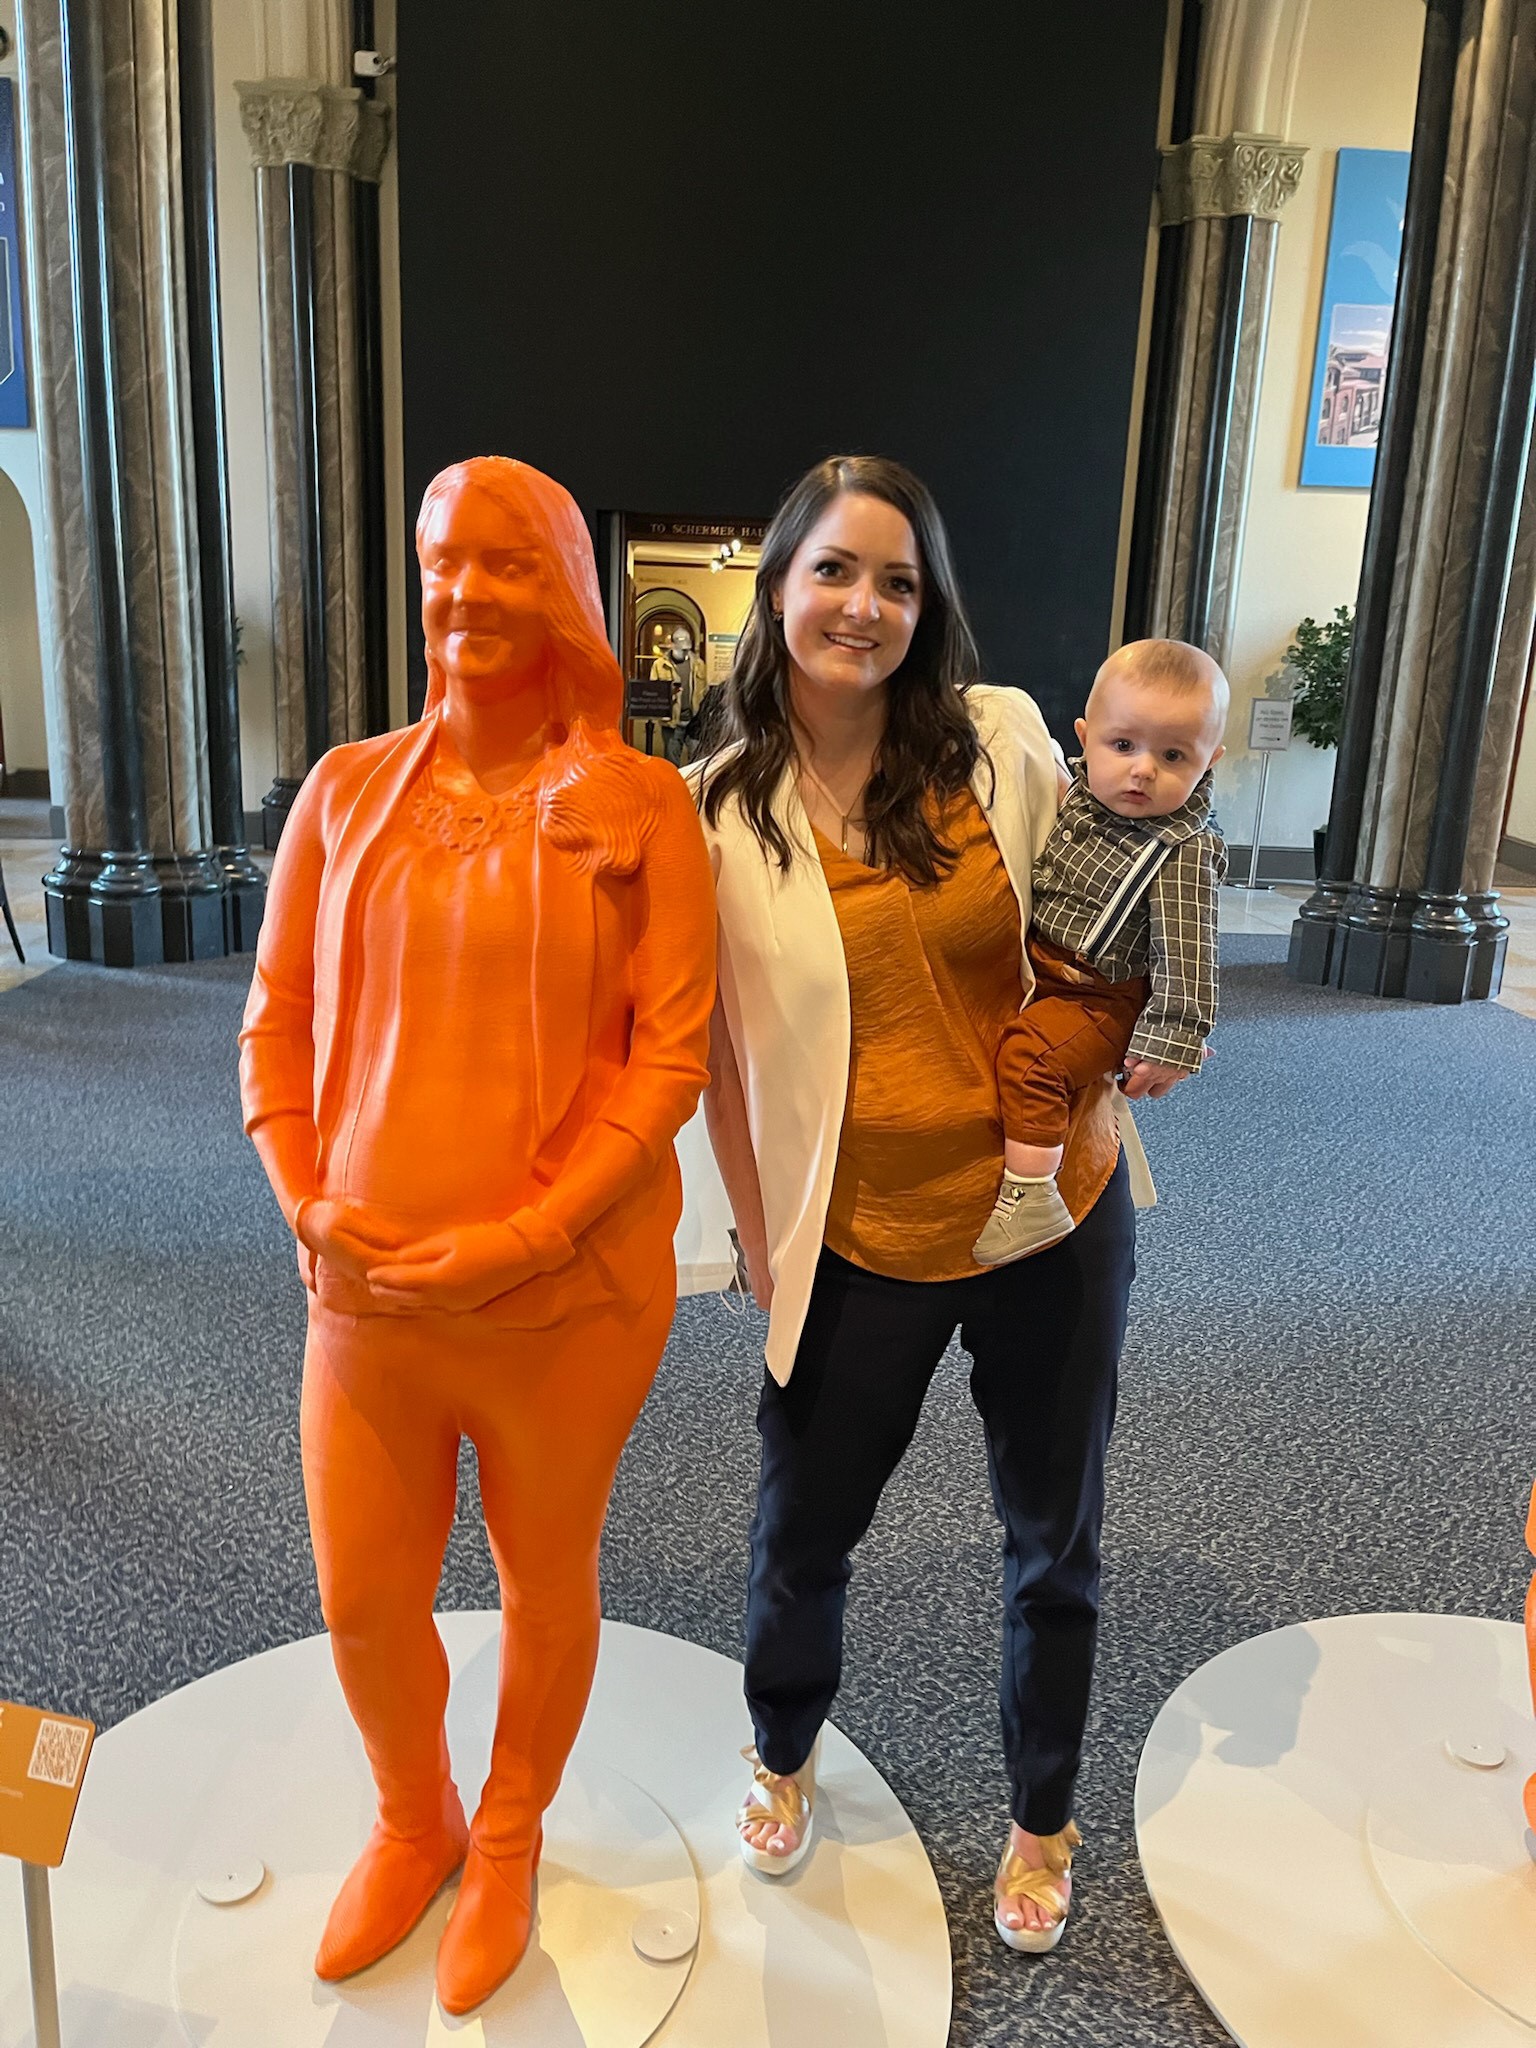 Amy Elliott holding her baby next to an orange 3D printed statue of herself.